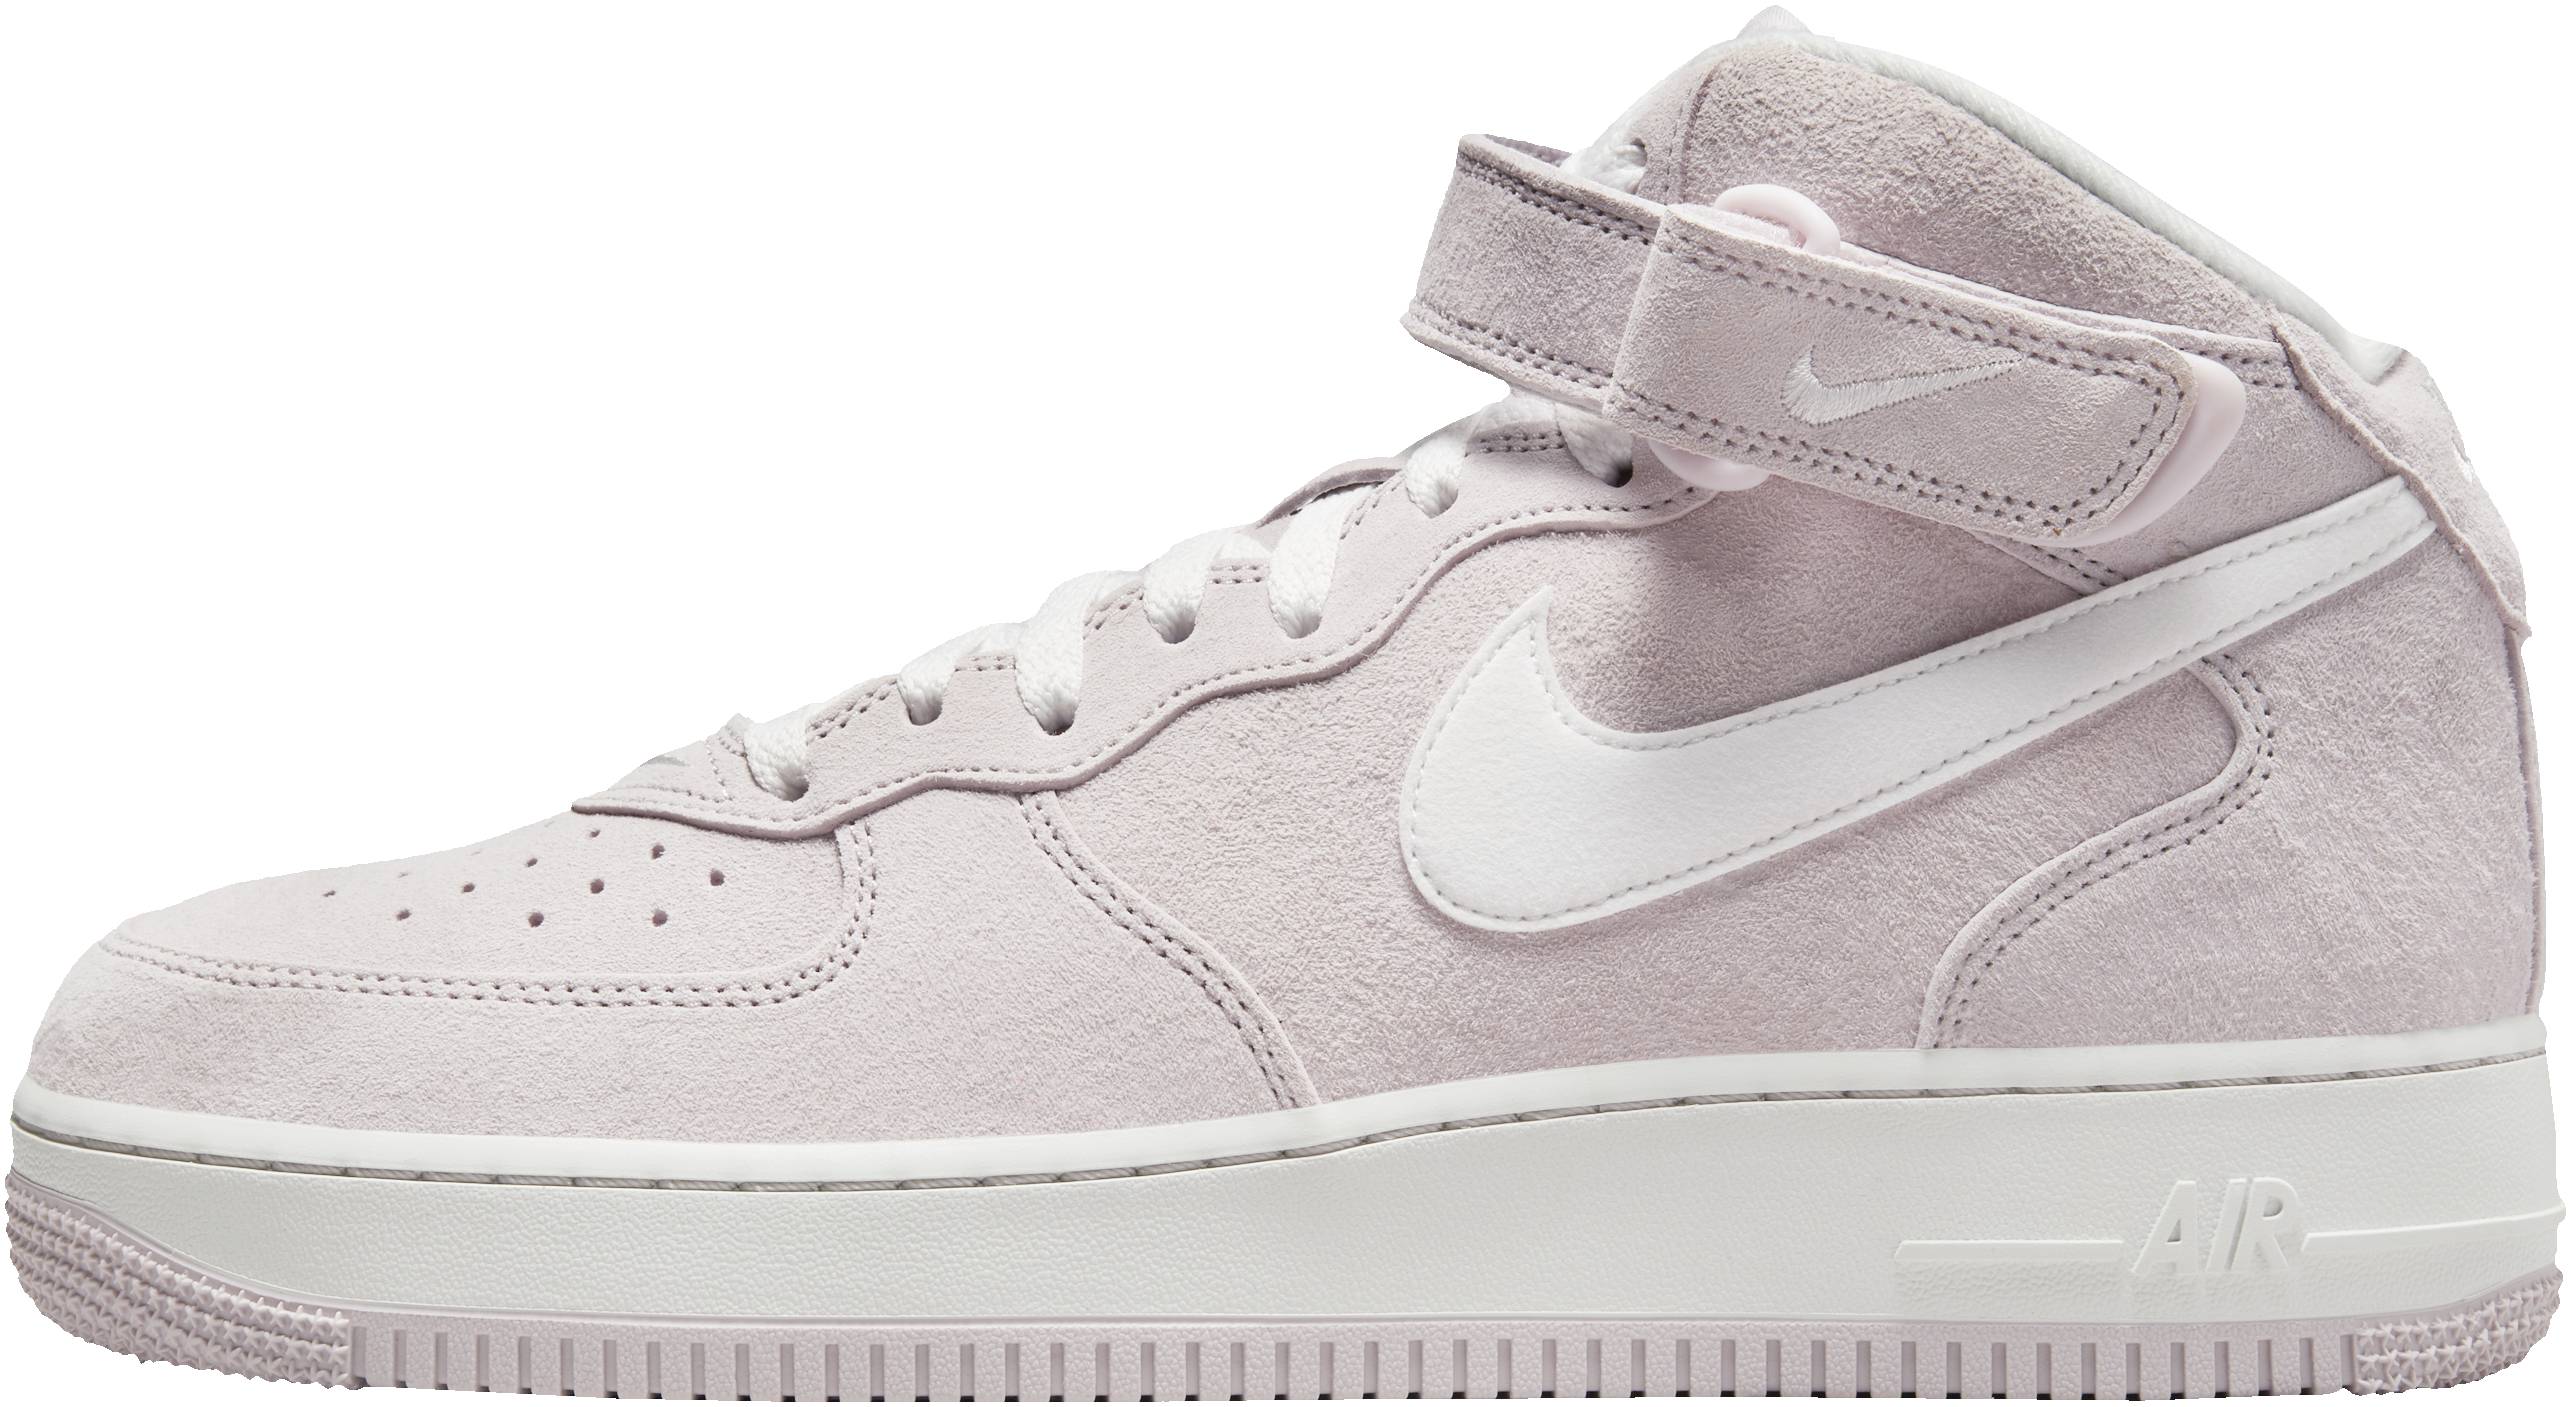 To emphasize Multiple how often Nike Air Force 1 07 Mid sneakers in 10+ colors | RunRepeat